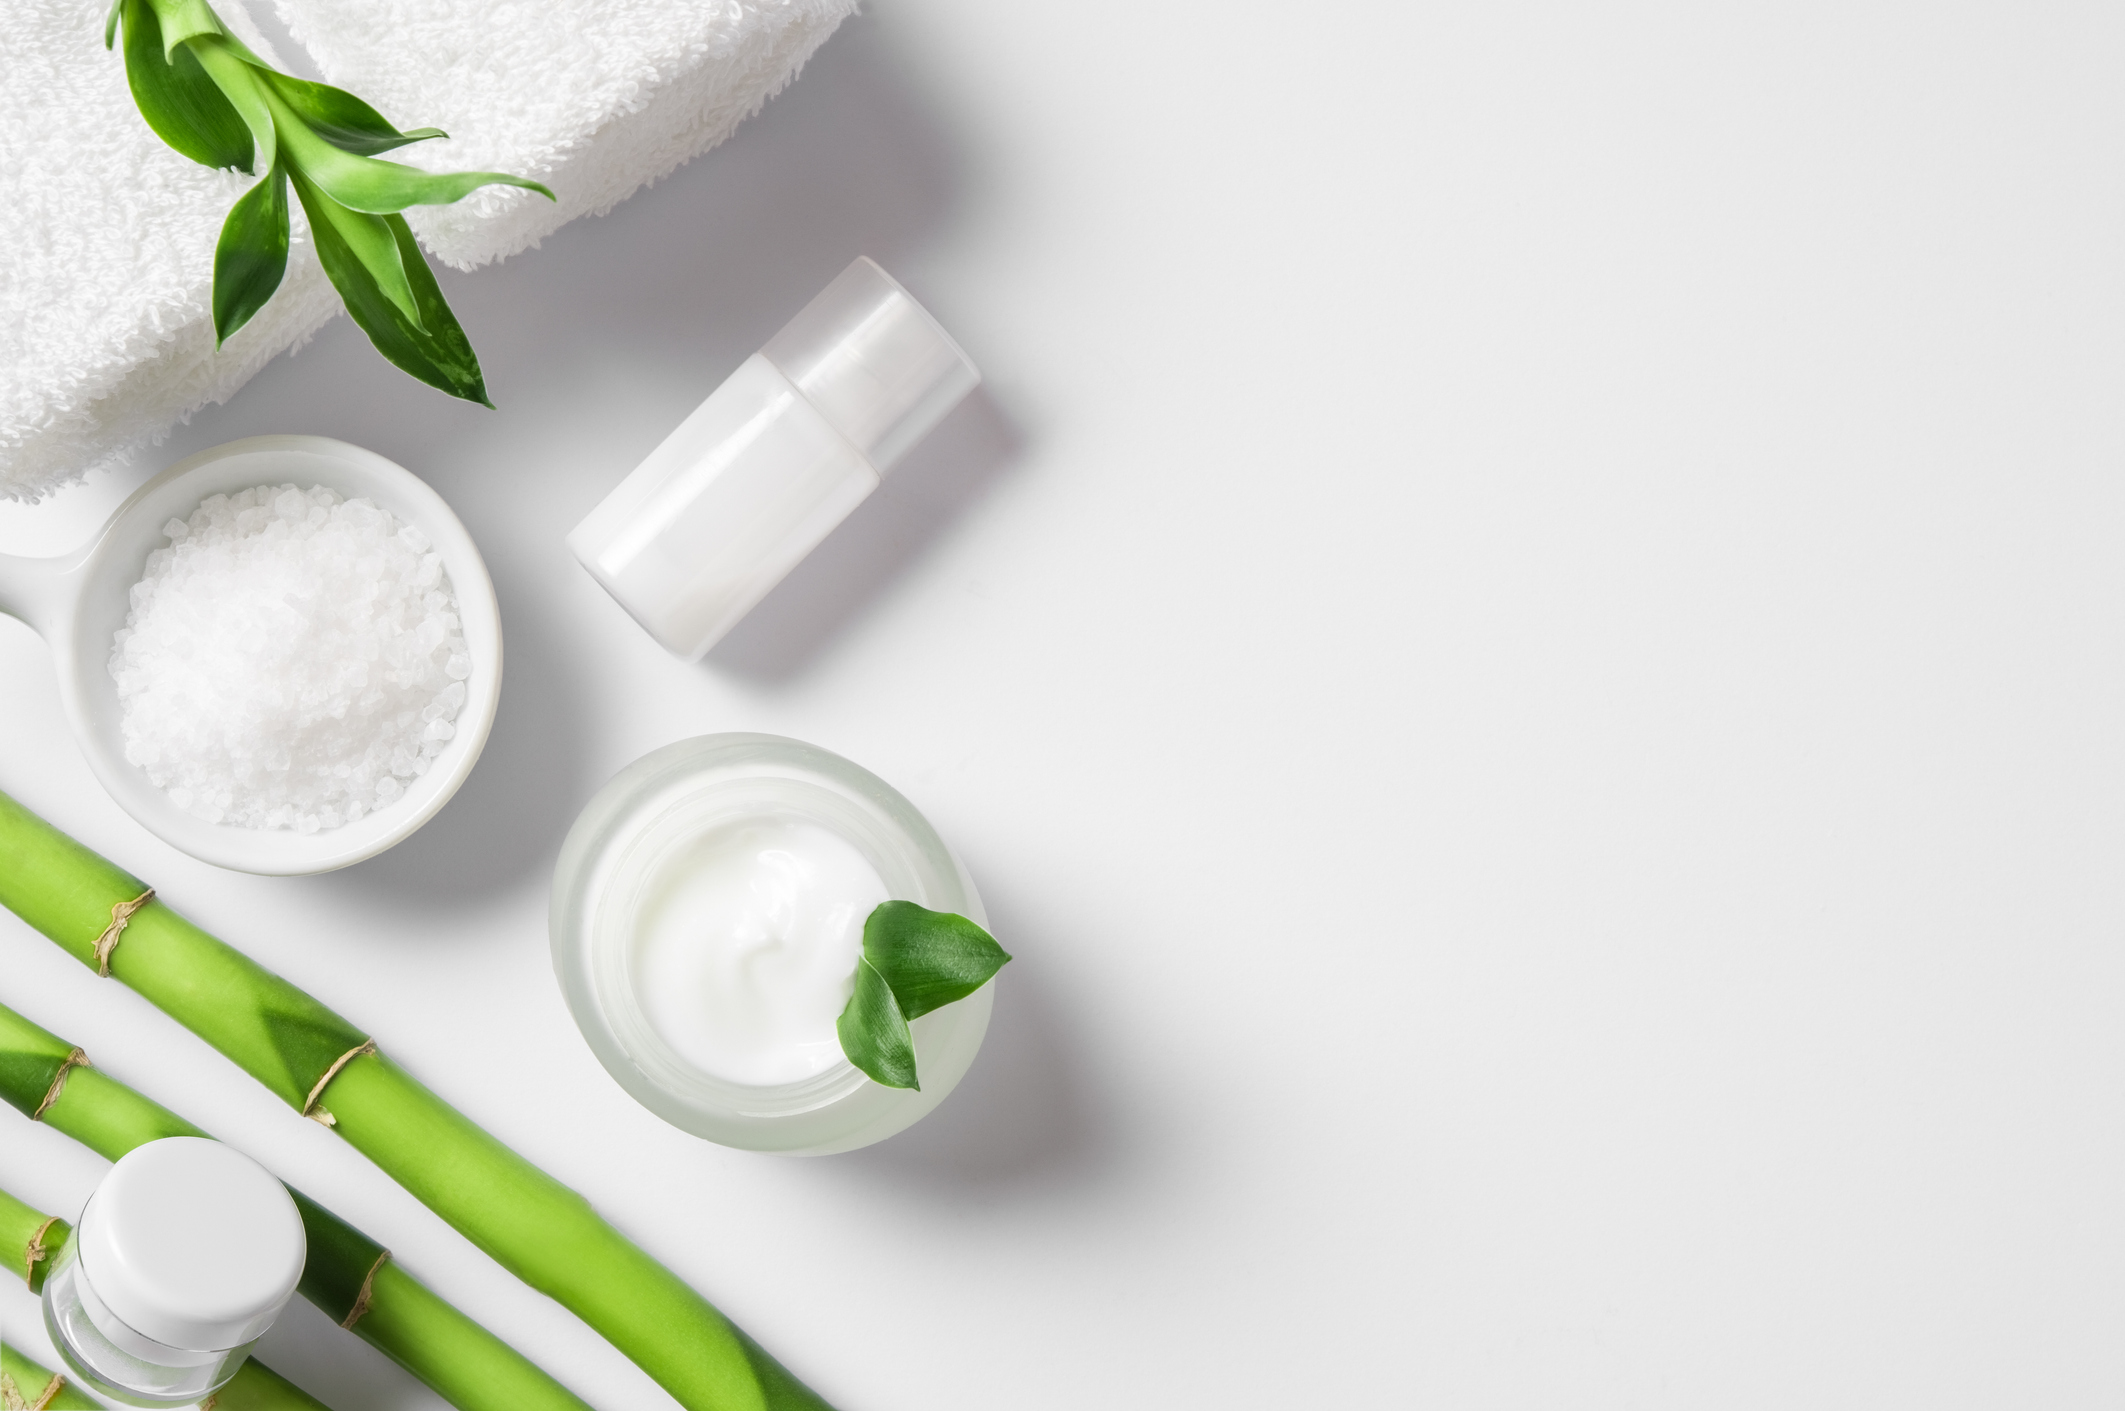 Top view of cosmetic products with natural ingredients on white background for natural beauty. High angle view of spa setting with natural moisturizer and bamboo sticks. Beauty spa background with copy space.